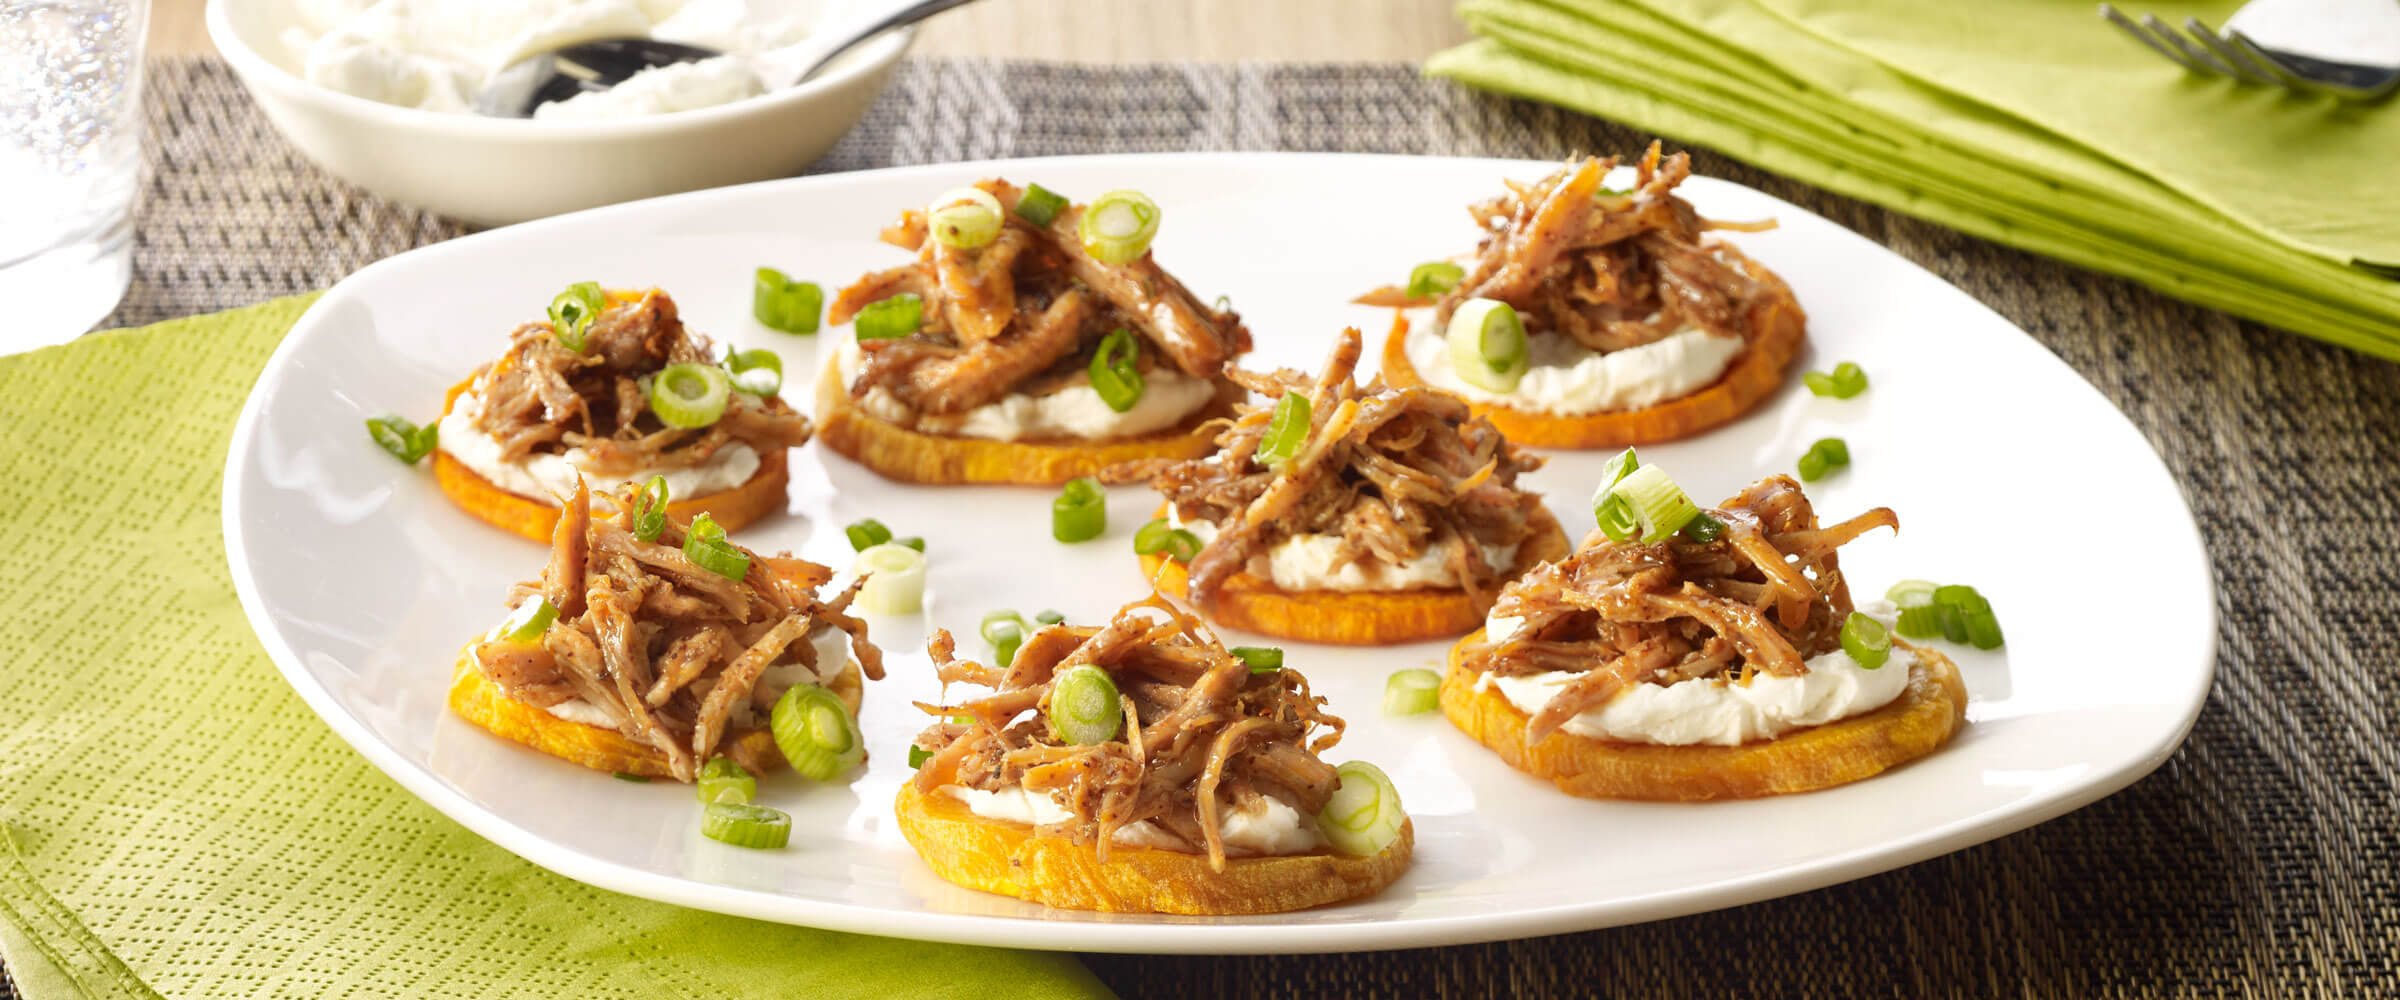 BBQ Pulled Pork Sweet Potato Bites topped with green onions on white plate with green napkin